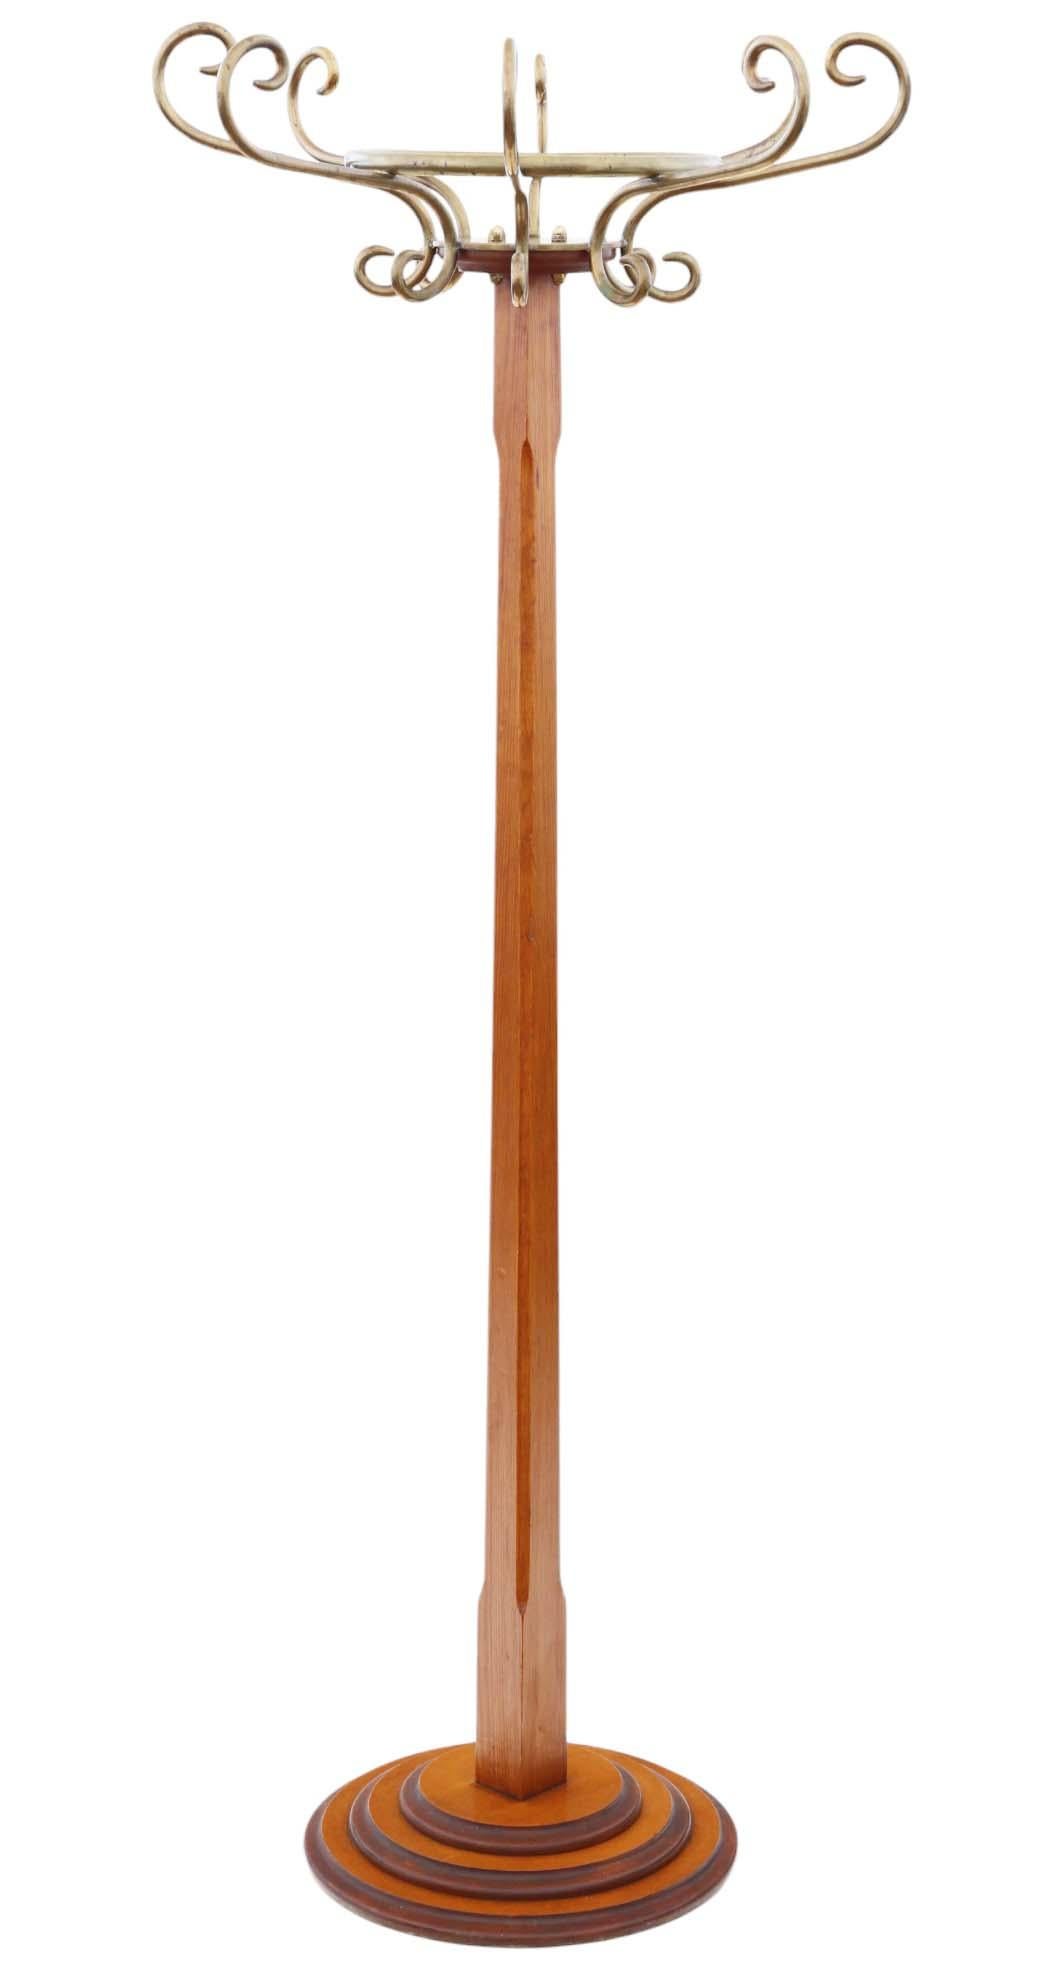 Victorian Vintage Retro Mixed Wood and Brass Hall Stand - Art Deco Style Coat/Hat Rack For Sale